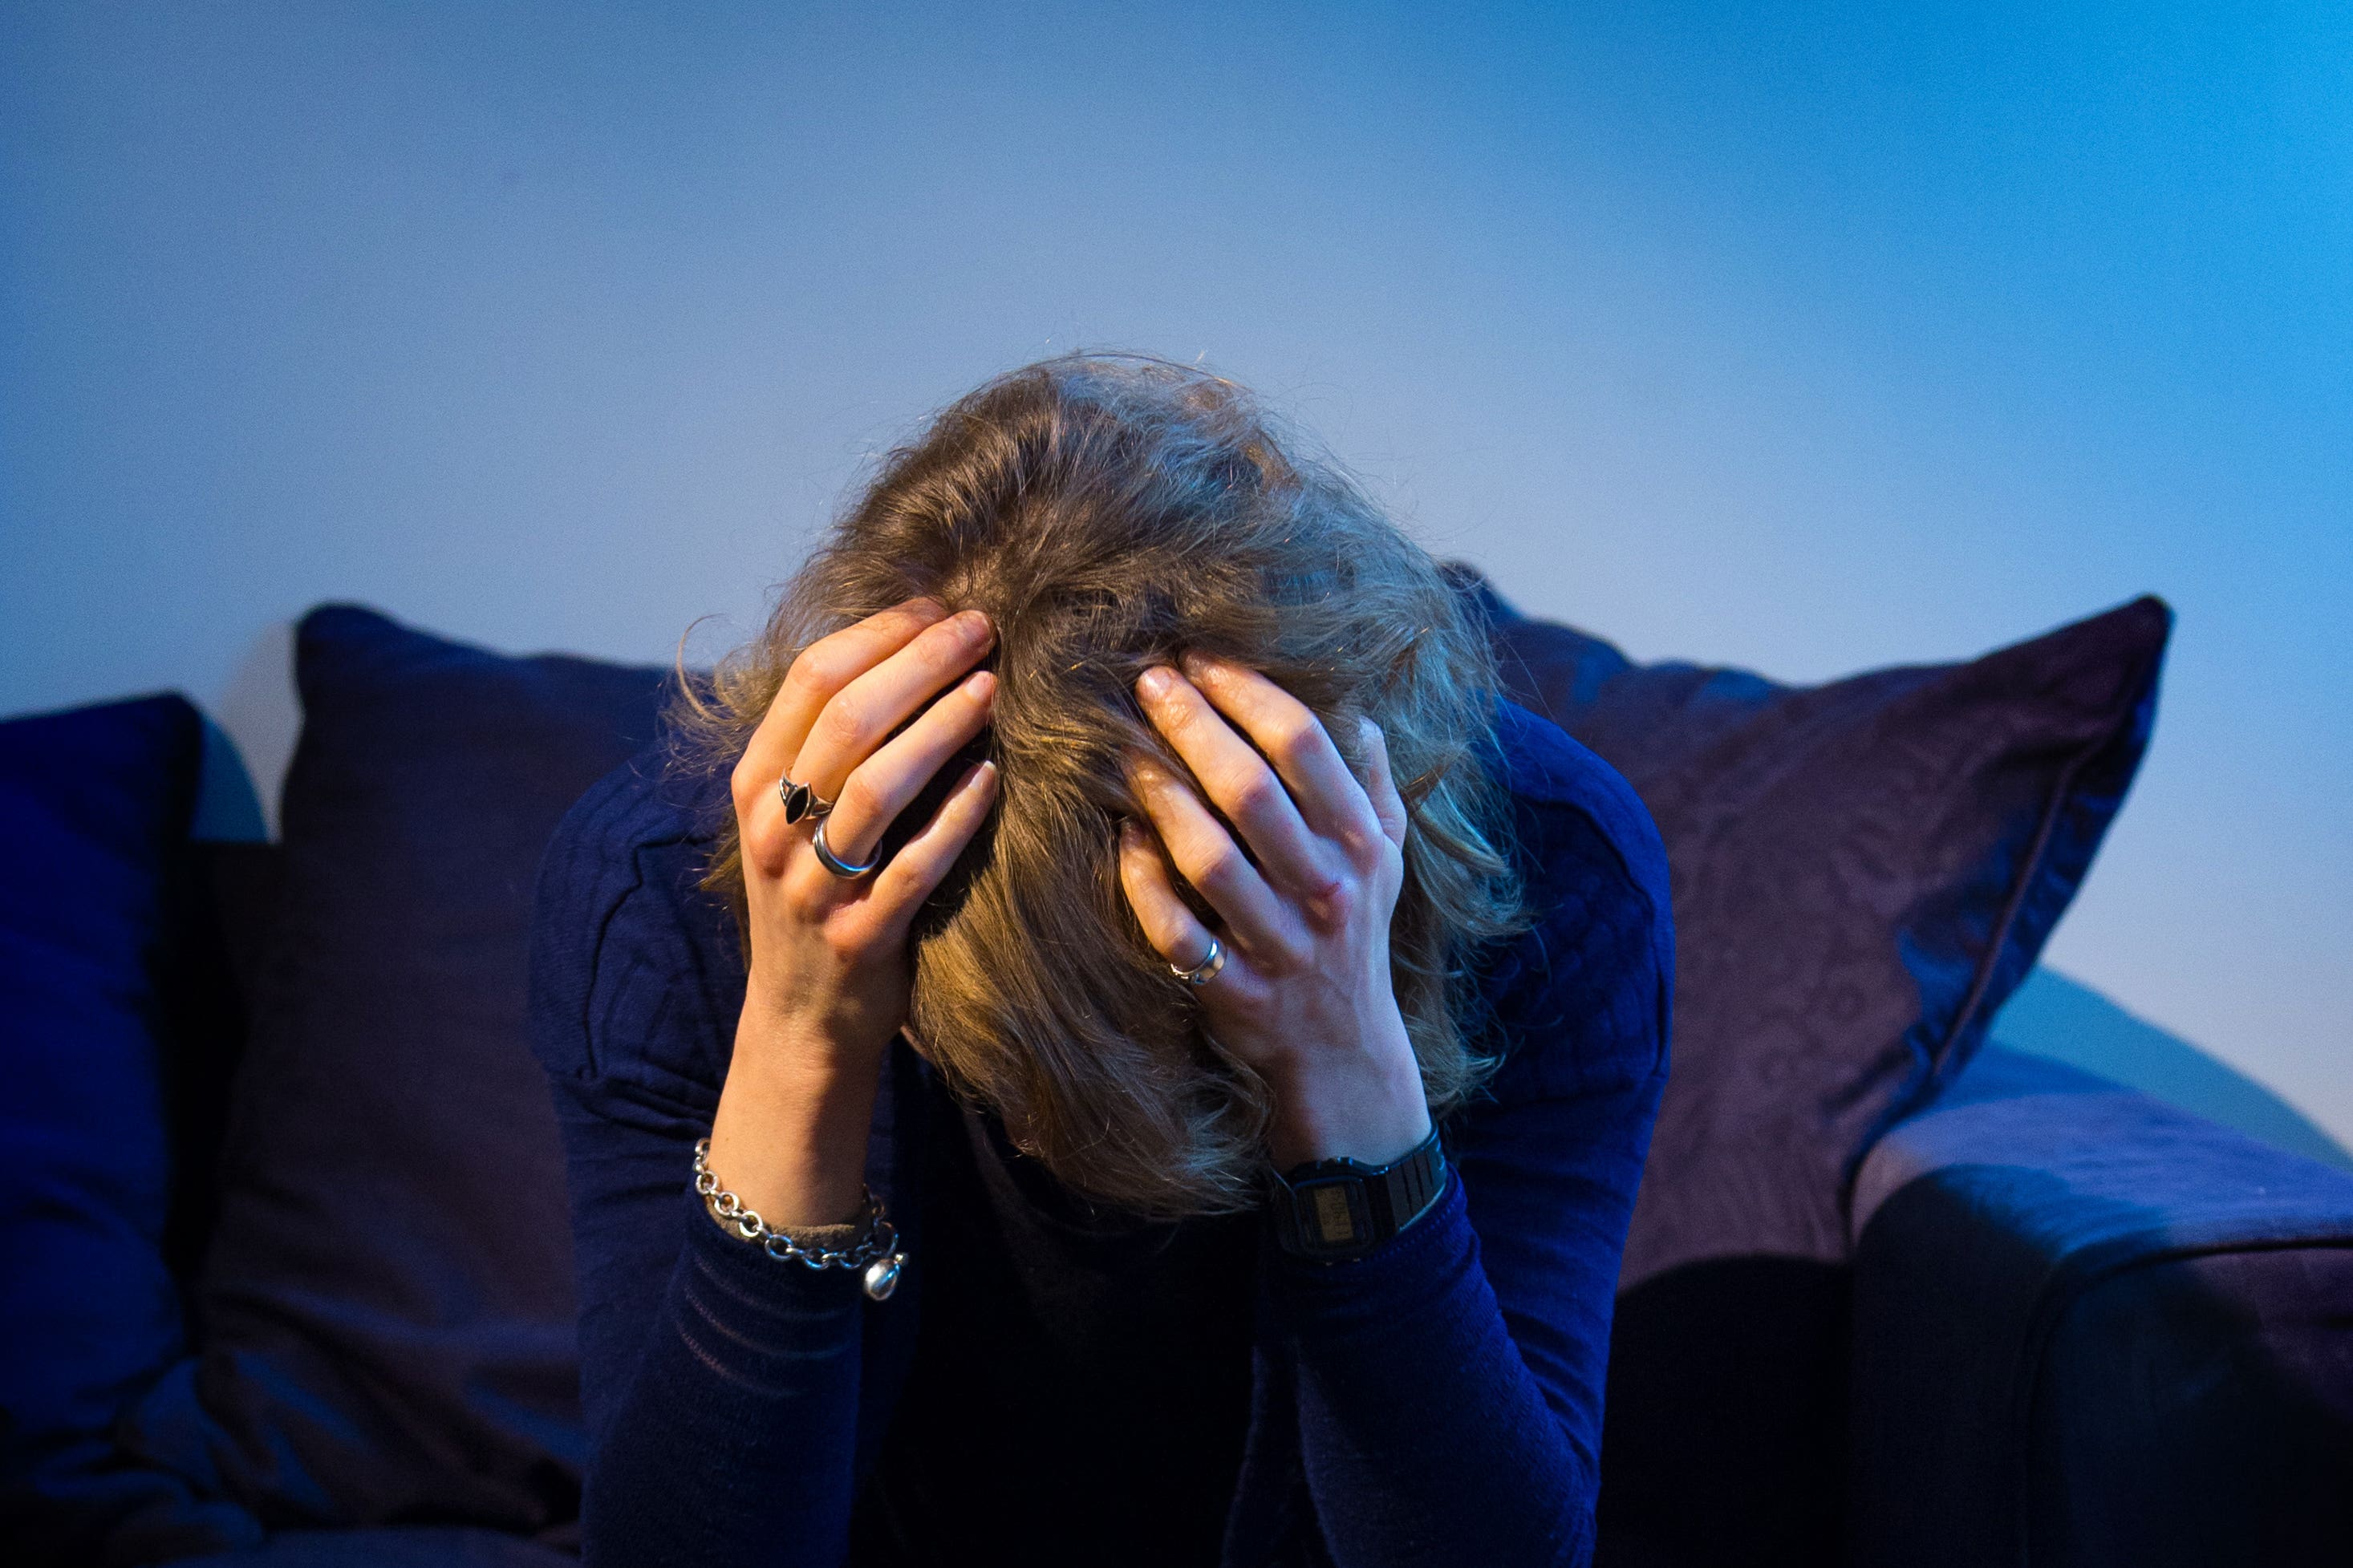 UK has unveiled proposals to crack down on domestic abuse